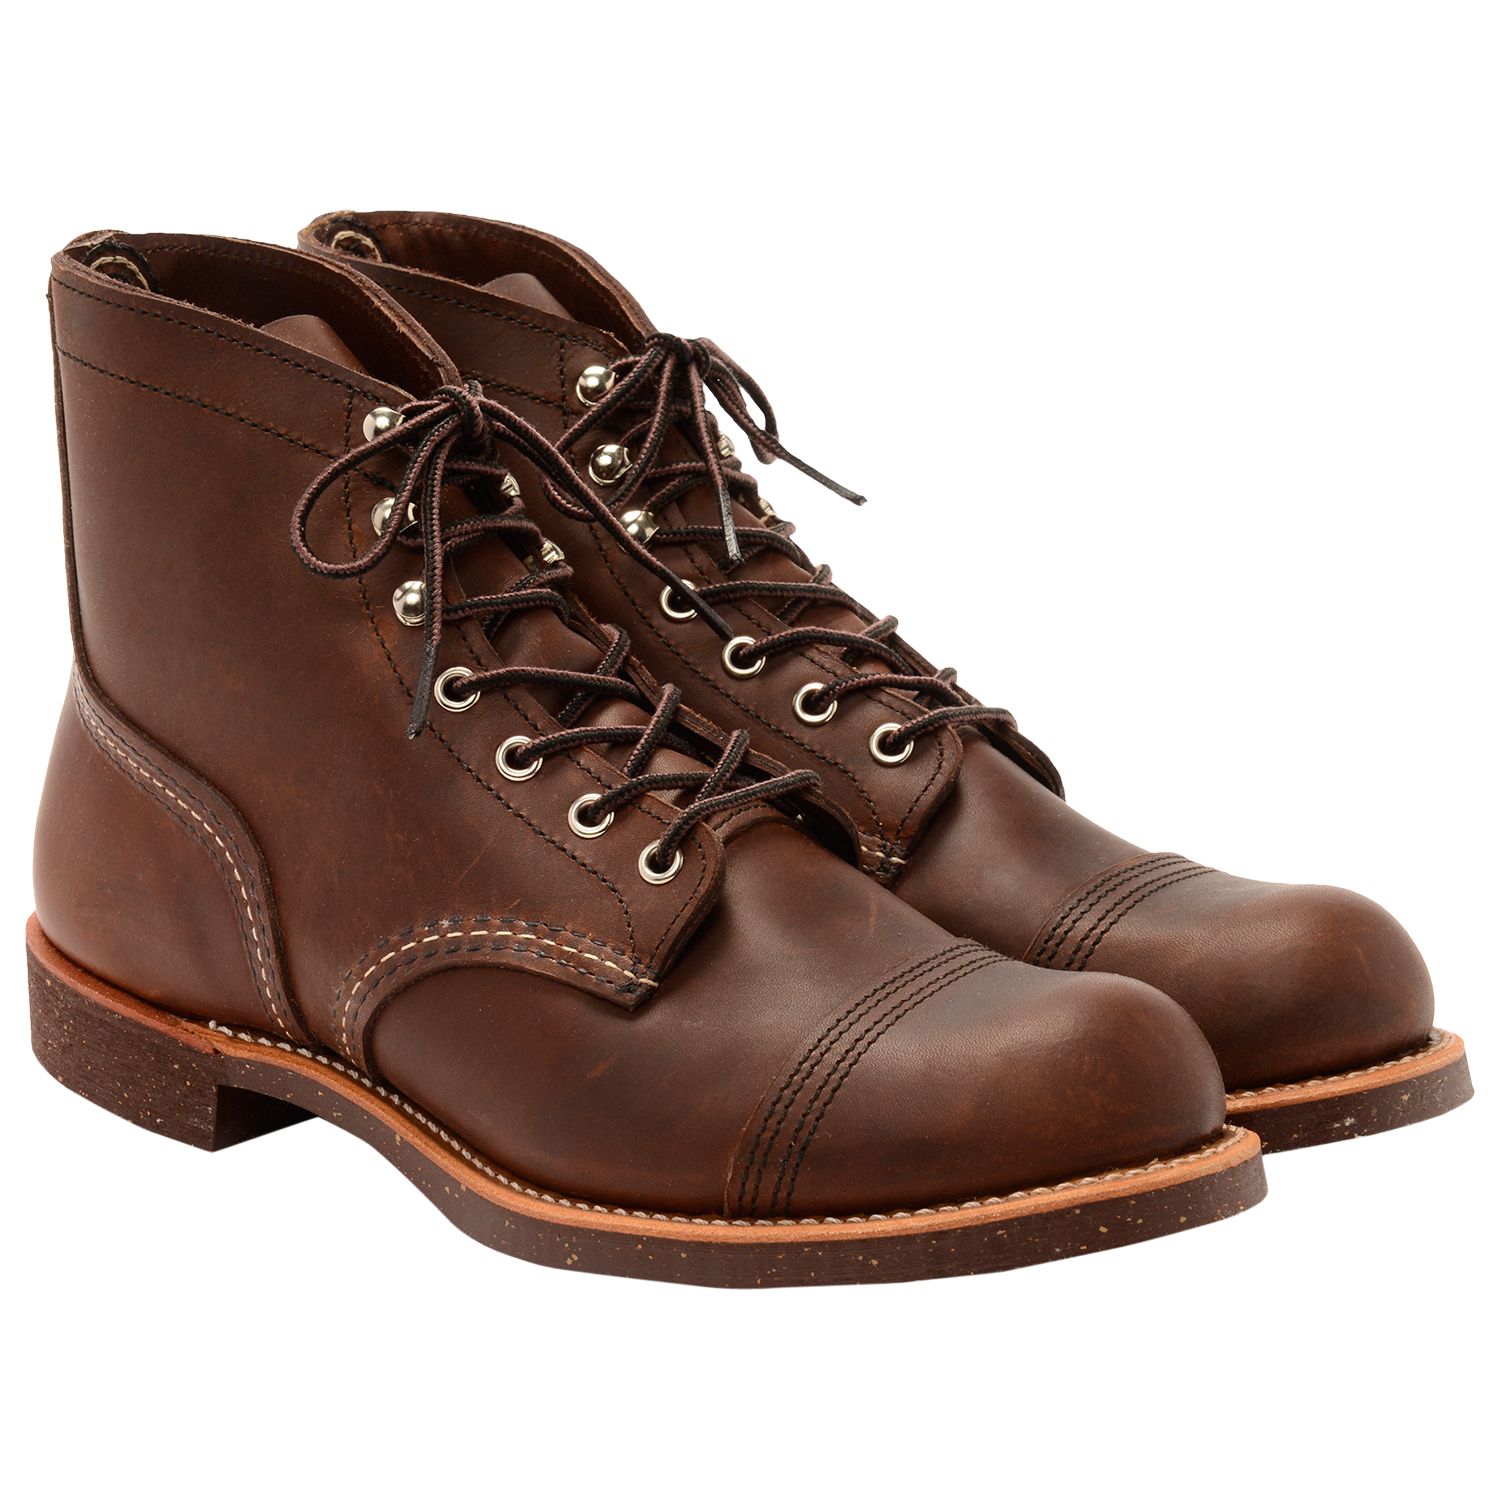 Red Wing 8111 Iron Ranger Boots, Amber Harness at John Lewis & Partners